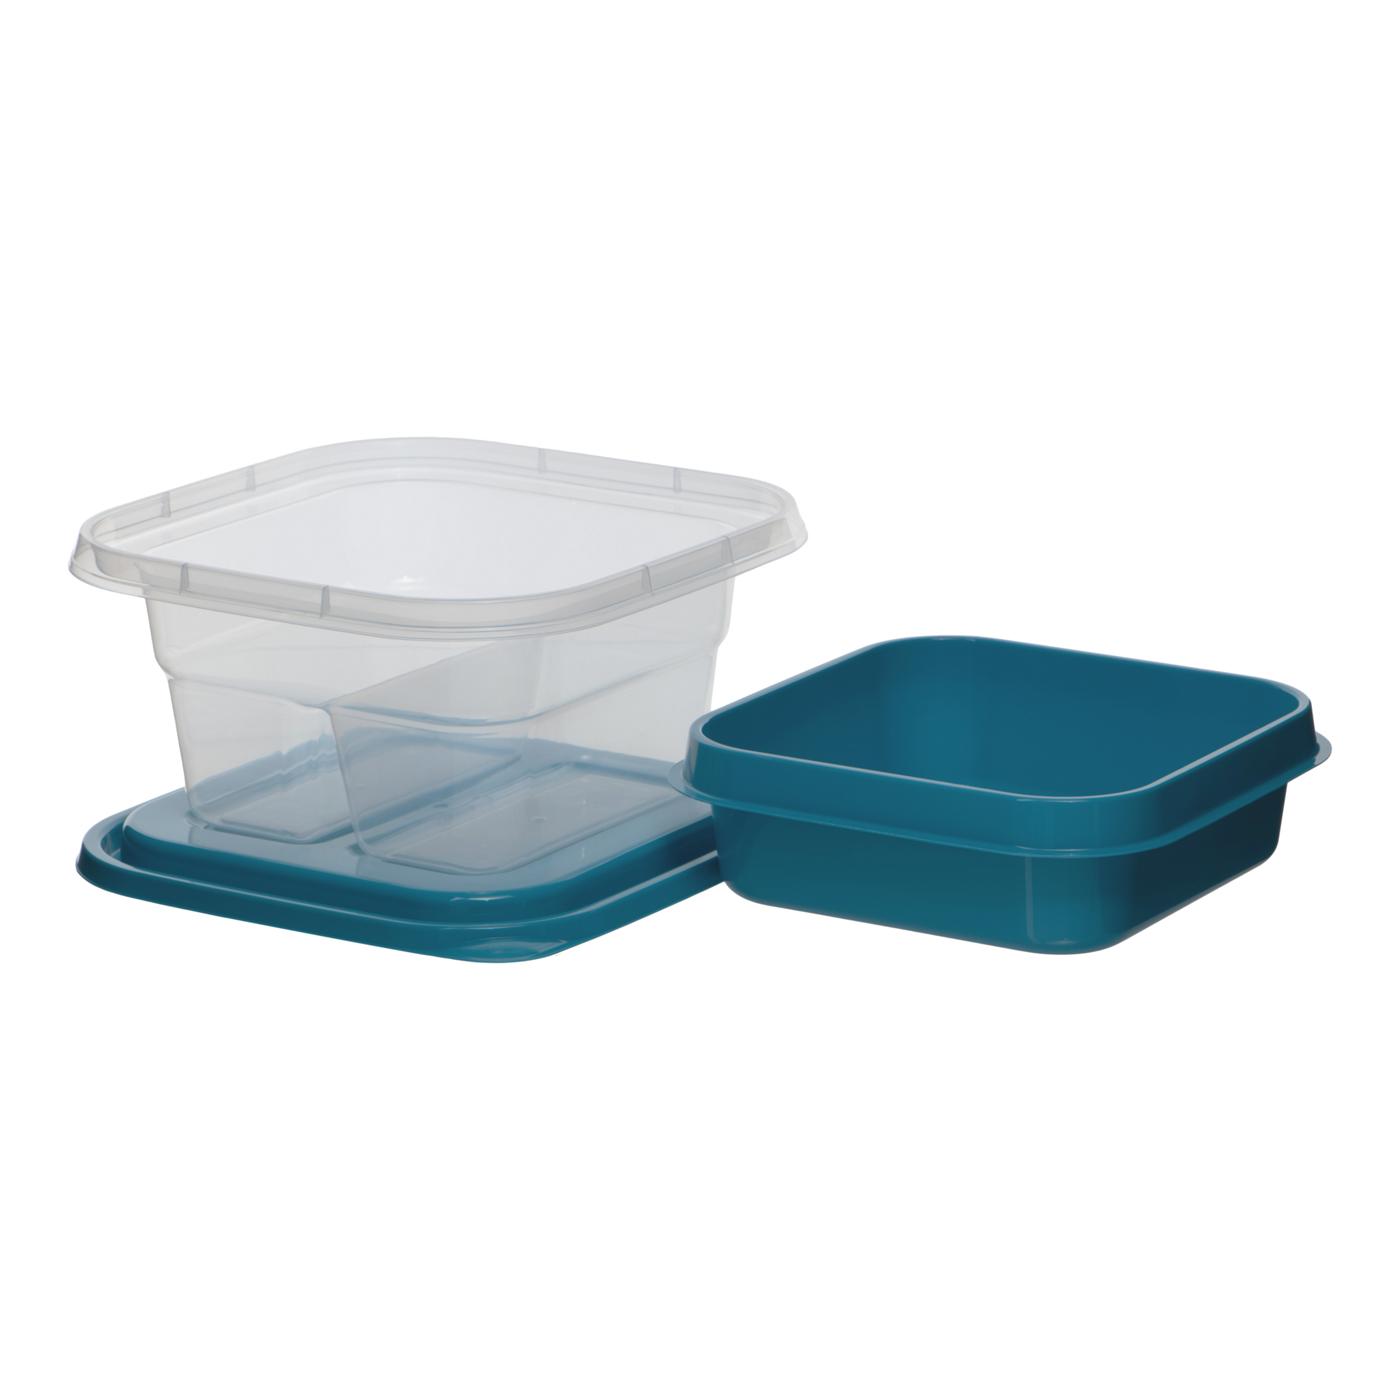 GoodCook Meal Prep 3 Cup Square 10 units, Blue, BPA Free - GoodCook